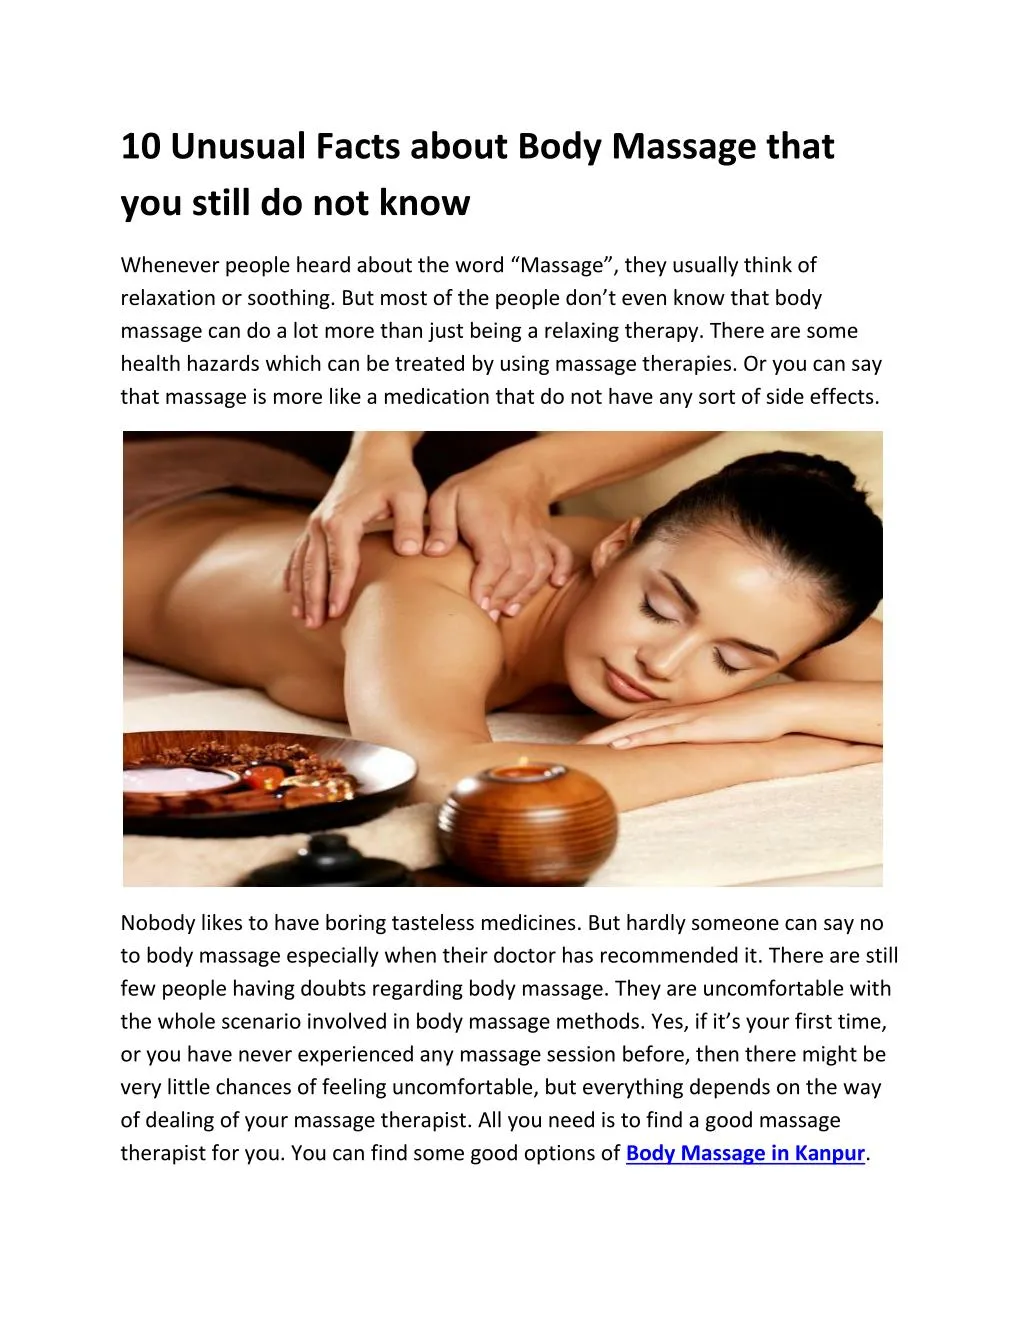 10 unusual facts about body massage that